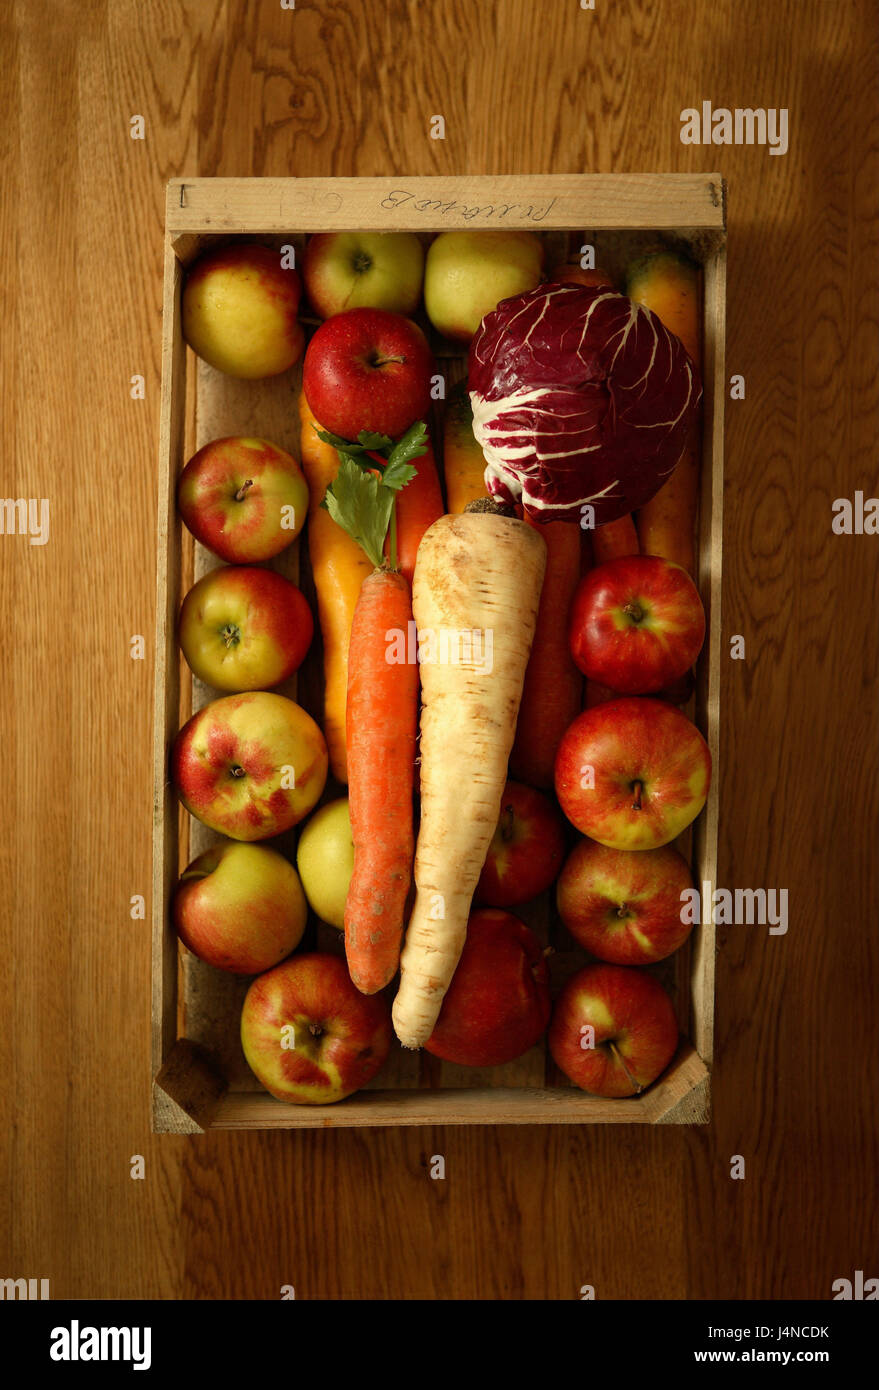 wooden box, fruit, vegetables, table, box, fruit box, vegetable box, carrots, carrots, apples, Radicchio, parsnips, salad, fruits, nutrition, healthy, health, vitamins, inside, Stock Photo